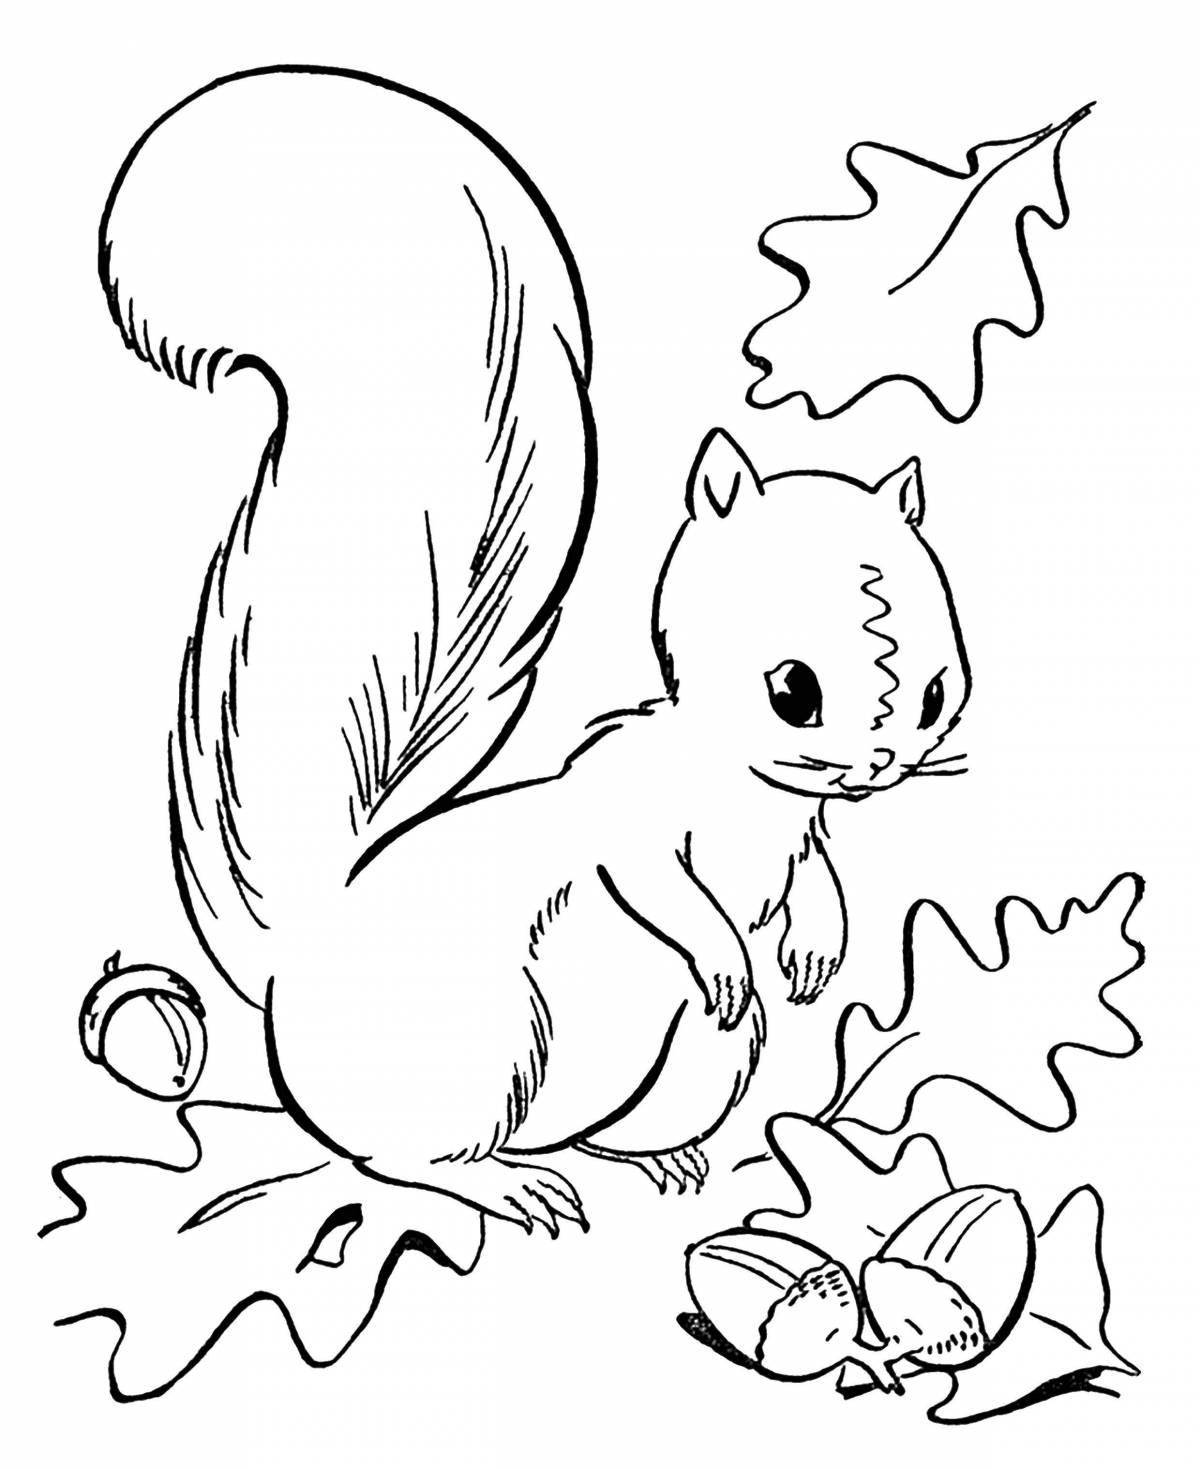 Charming coloring of a squirrel with a bump